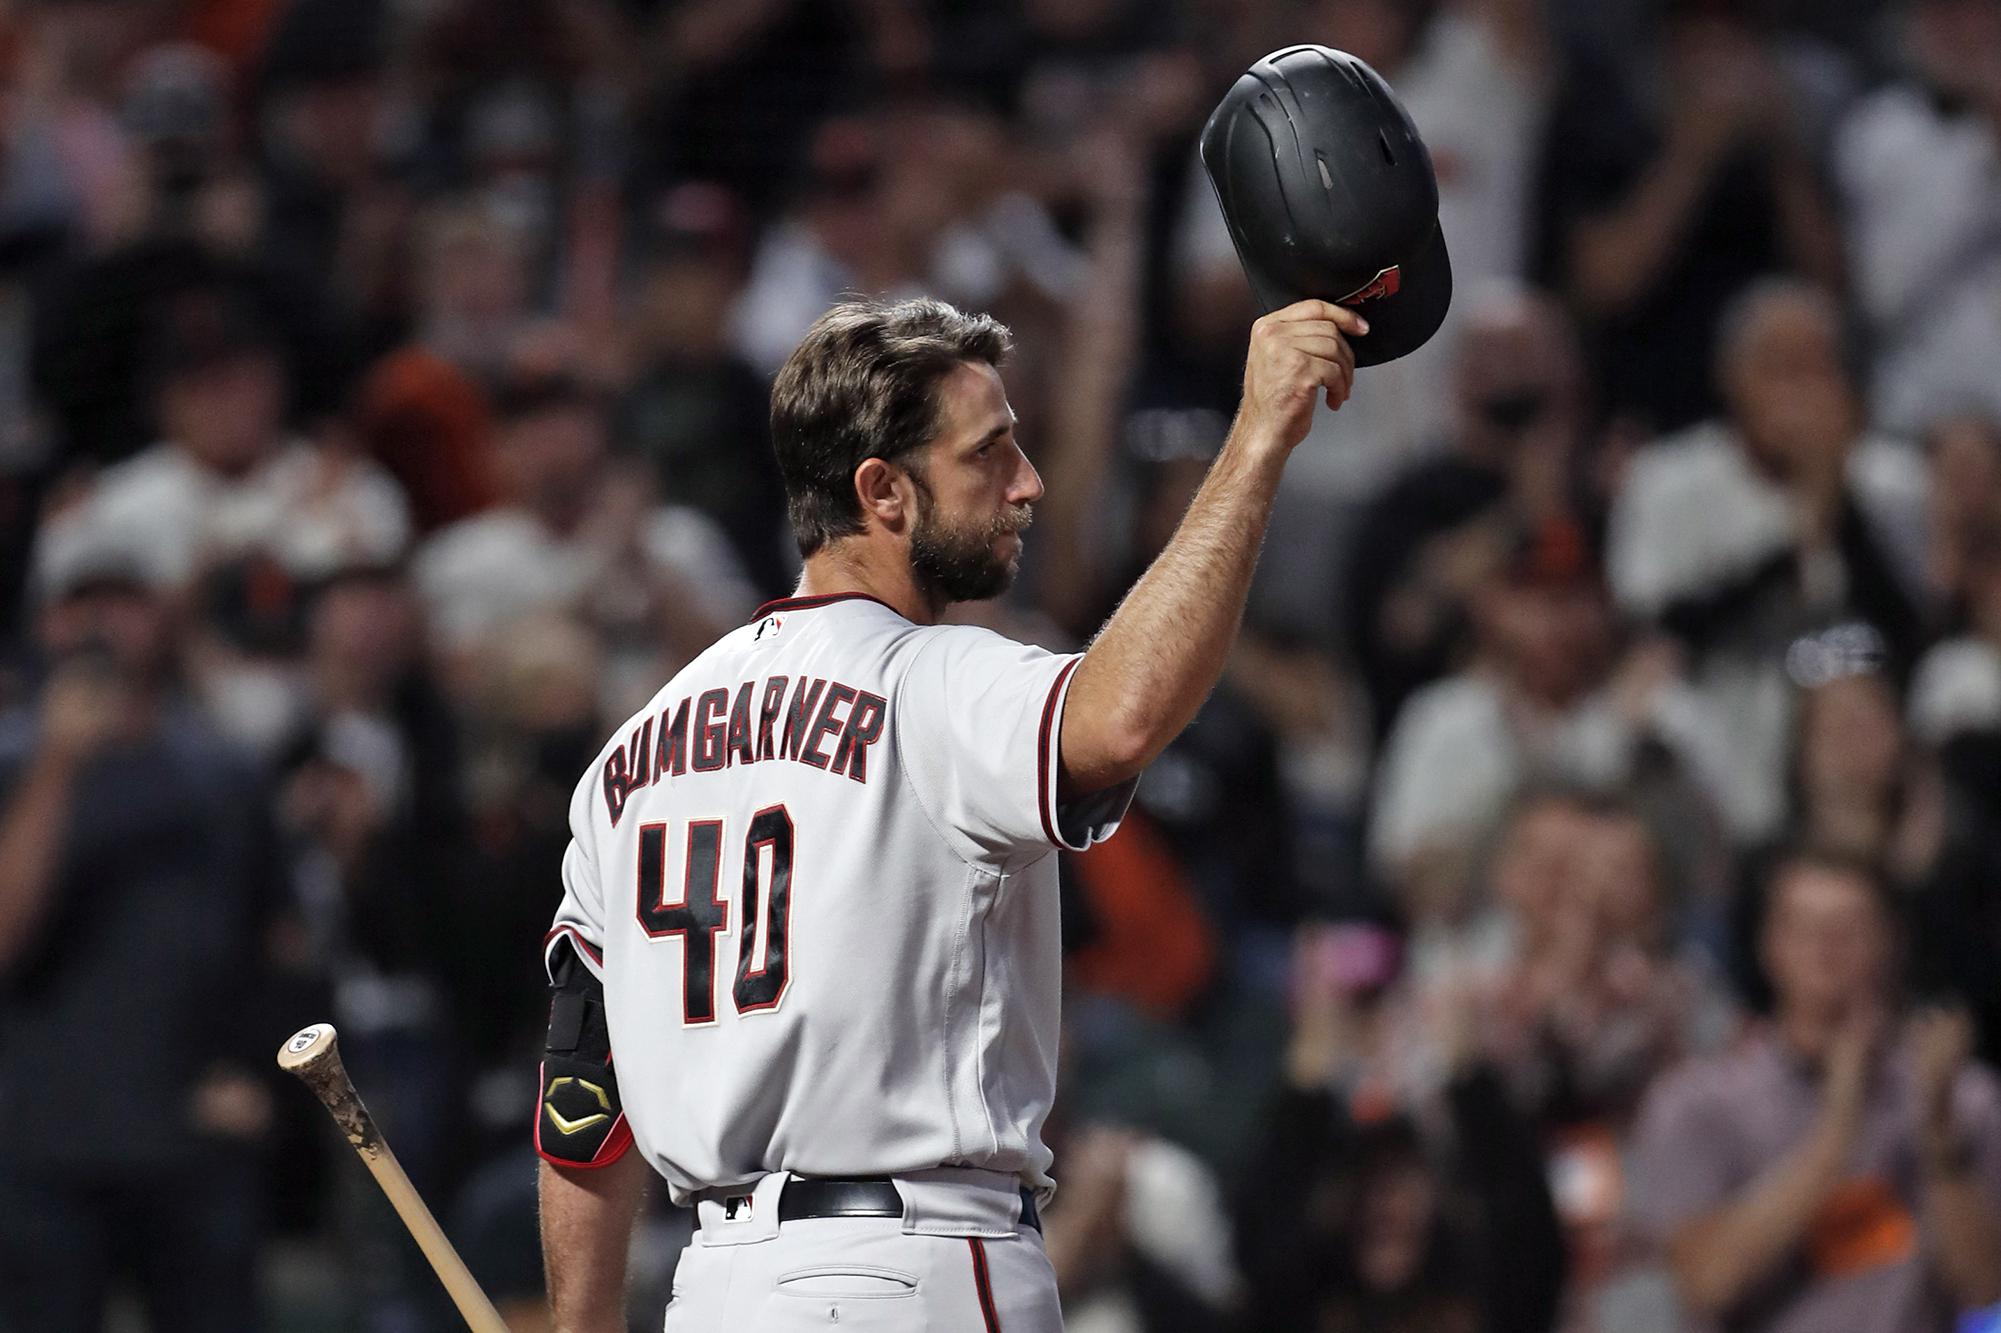 World Series 2014: Madison Bumgarner Rises to the Moment, and Jaws